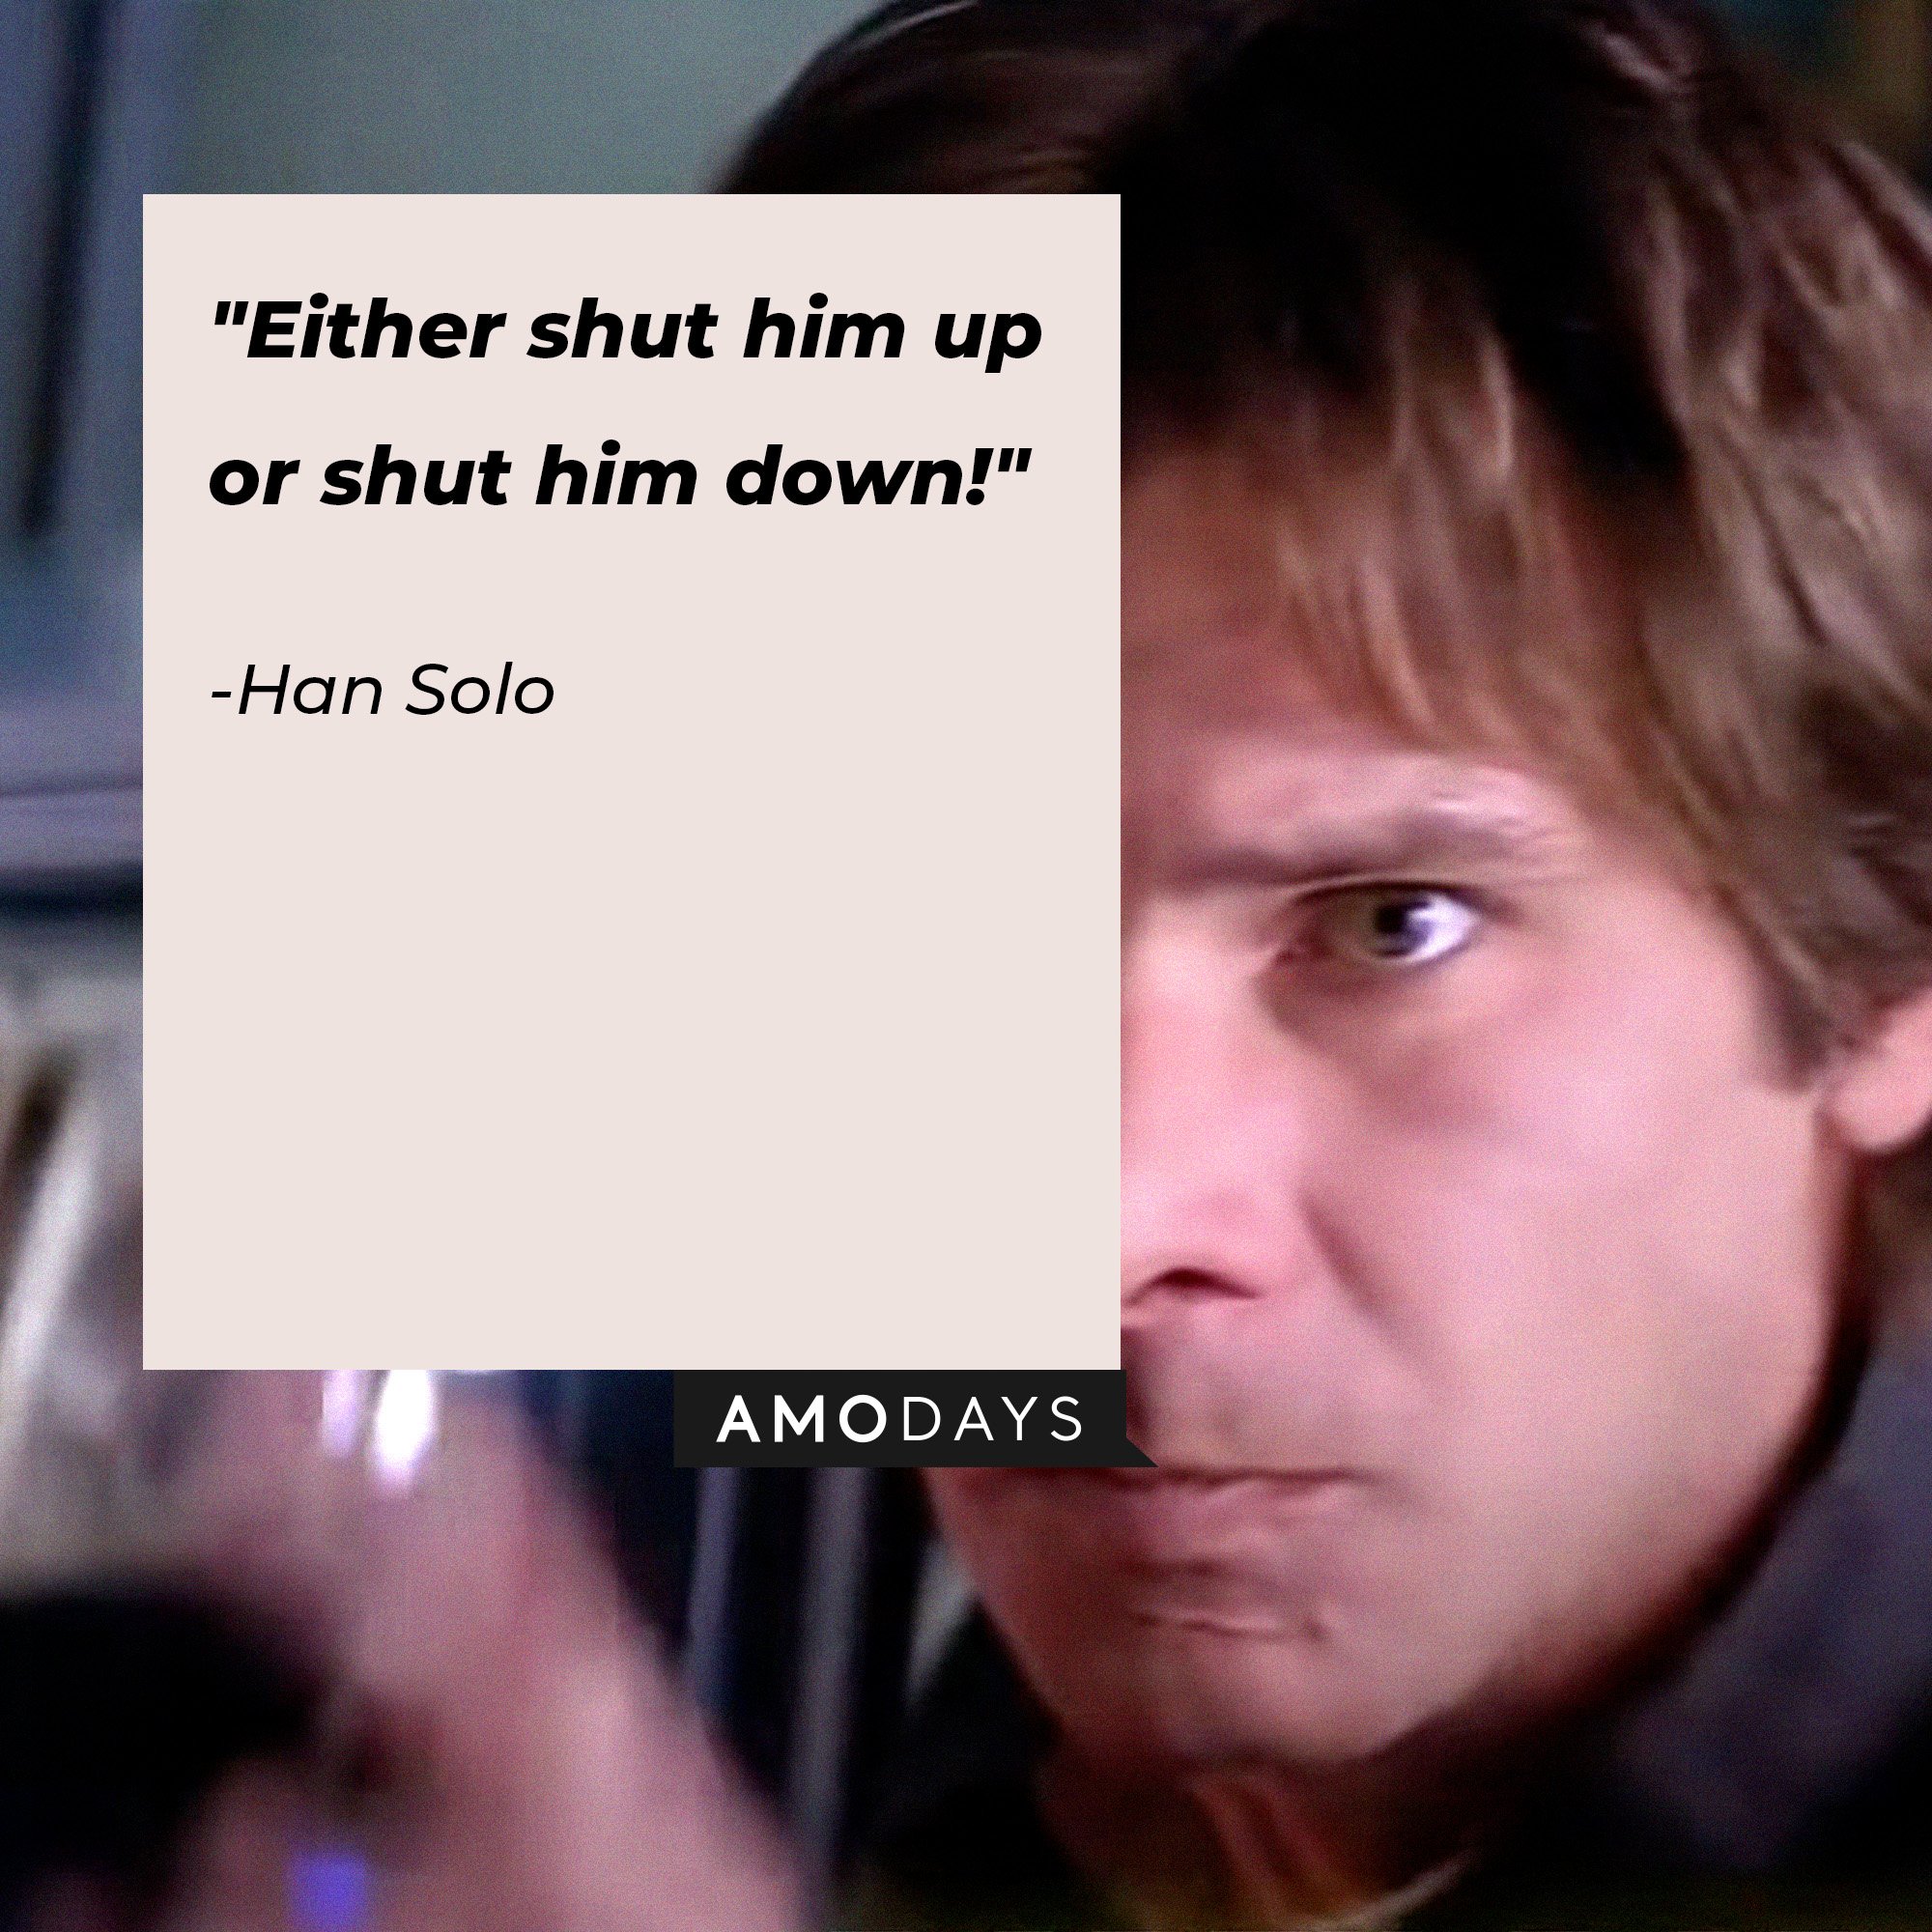 Han Solo’s quote: "Either shut him up or shut him down!" | Image: AmoDays